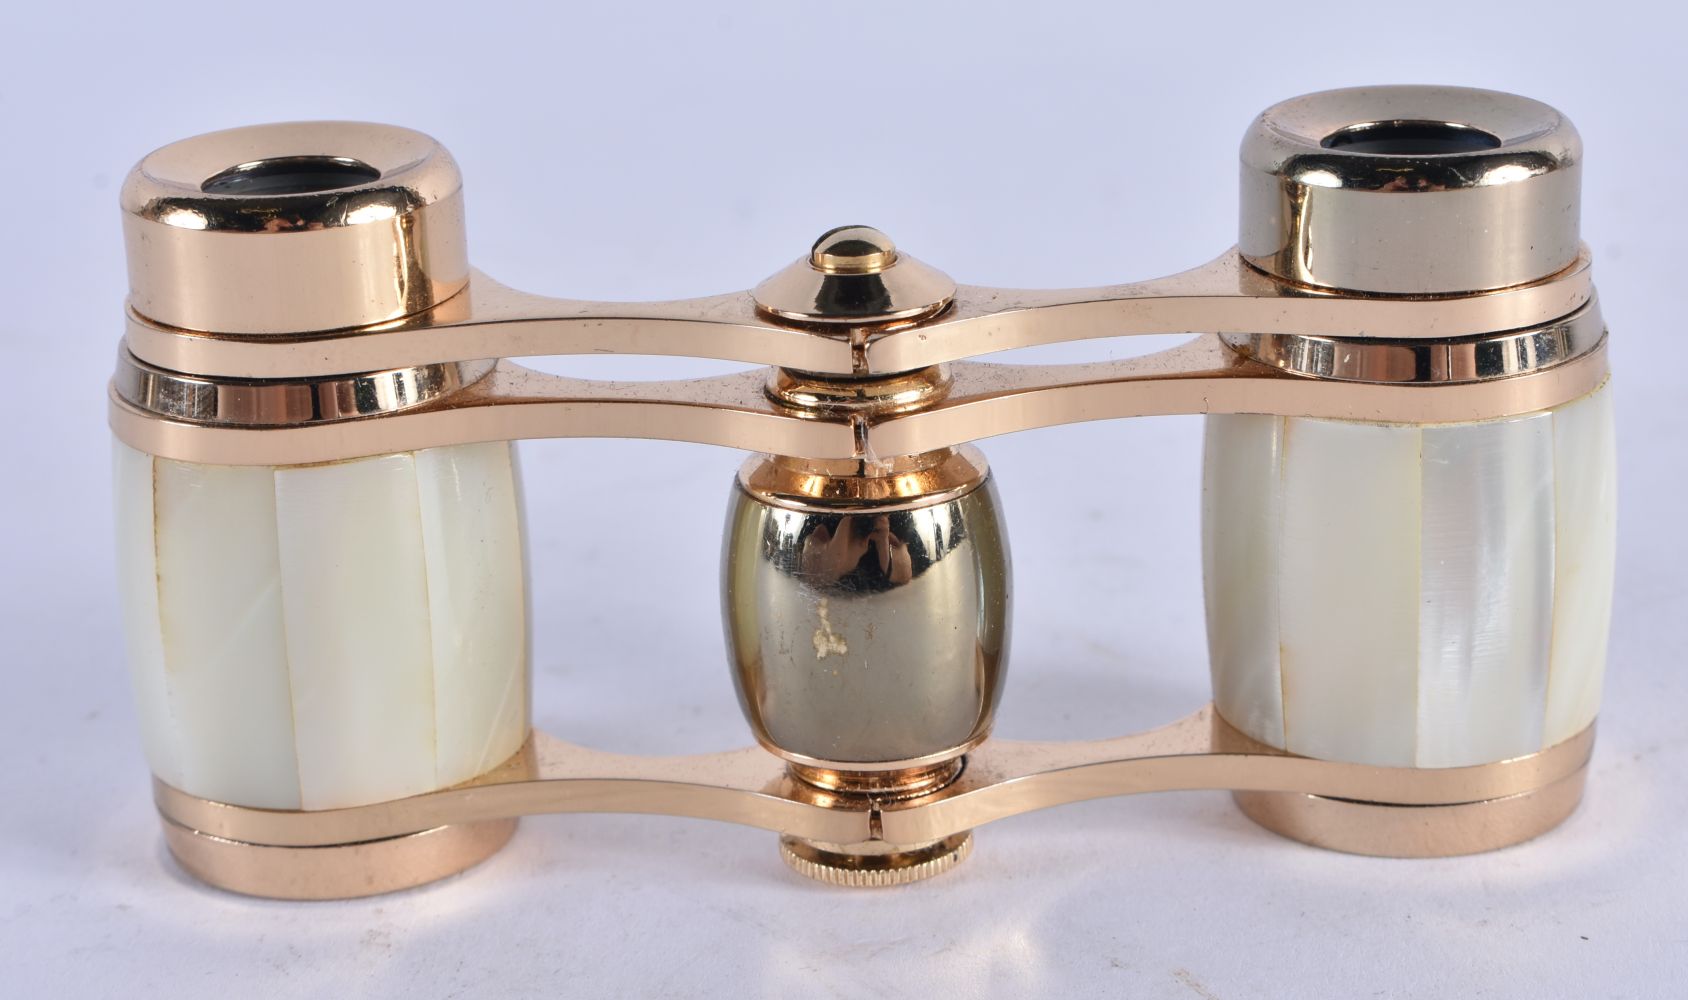 A PAIR OF MOTHER OF PEARL OPERA GLASSES. 9 cm x 6 cm. - Image 2 of 4